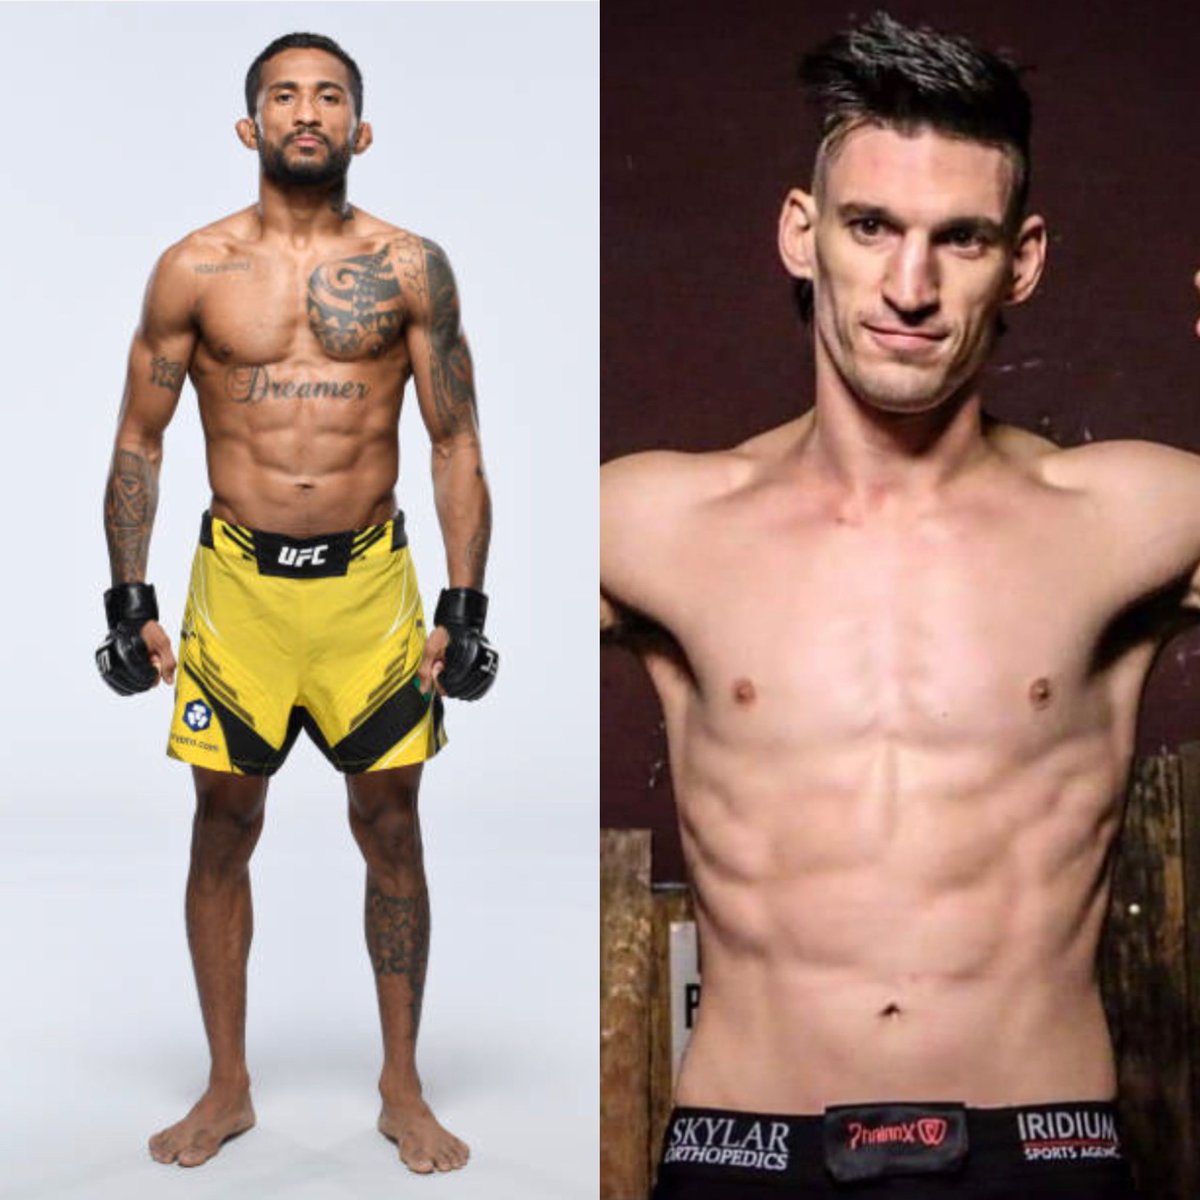 🚨| Khusein Askhabov OUT. Joanderson Brito will now take on Westin Wilson at #UFCVegas76 on July 1.
[first rep. the_mma_matchmaker IG]
#UFCVegas76 #UFC #MMA